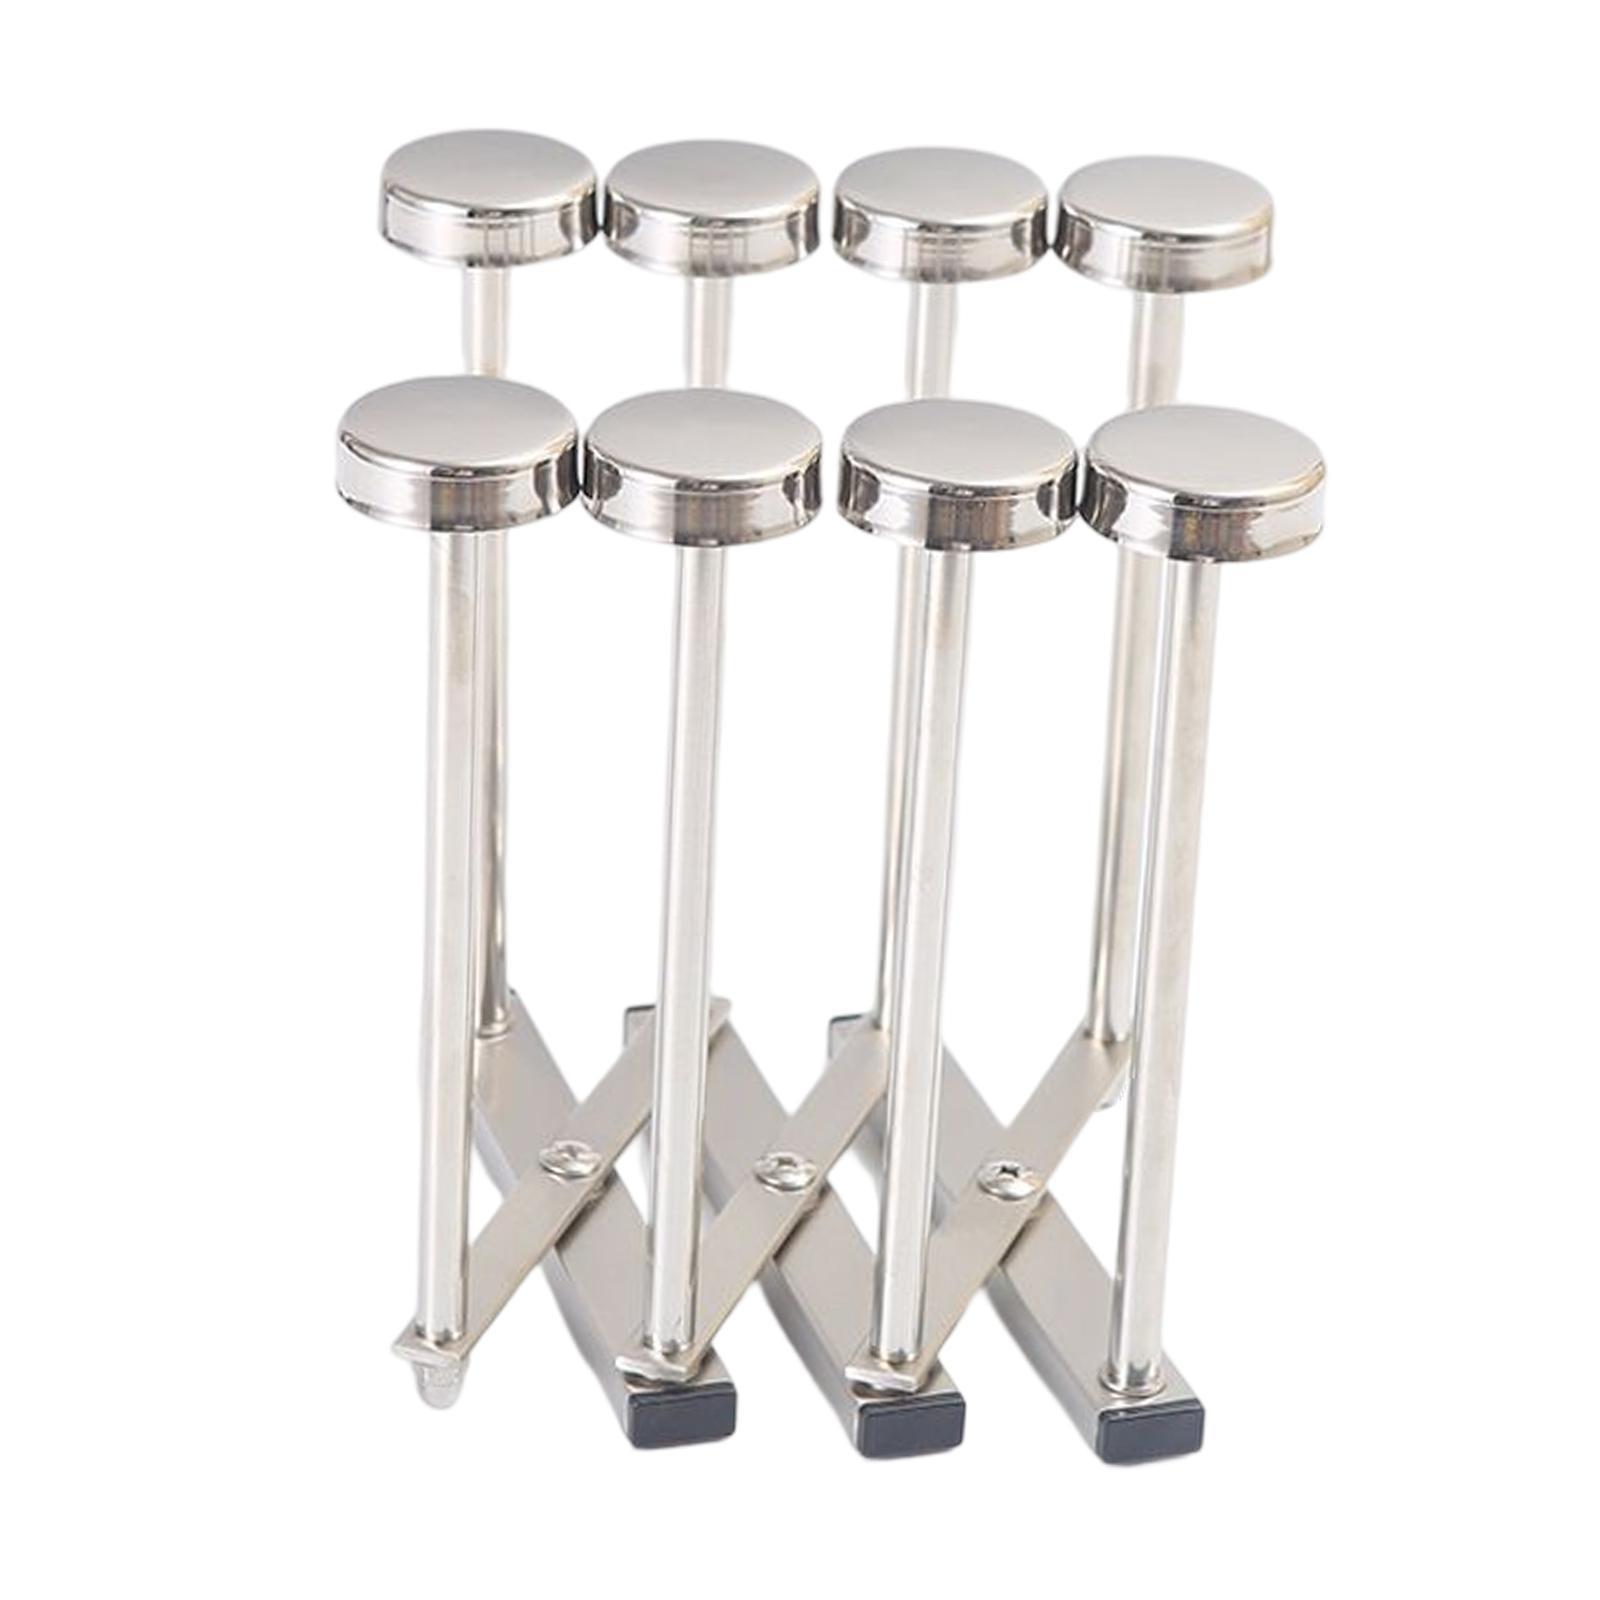 Cups Drying Rack Stand Coffee Cup Holder for Tabletop Kitchen Restaurant